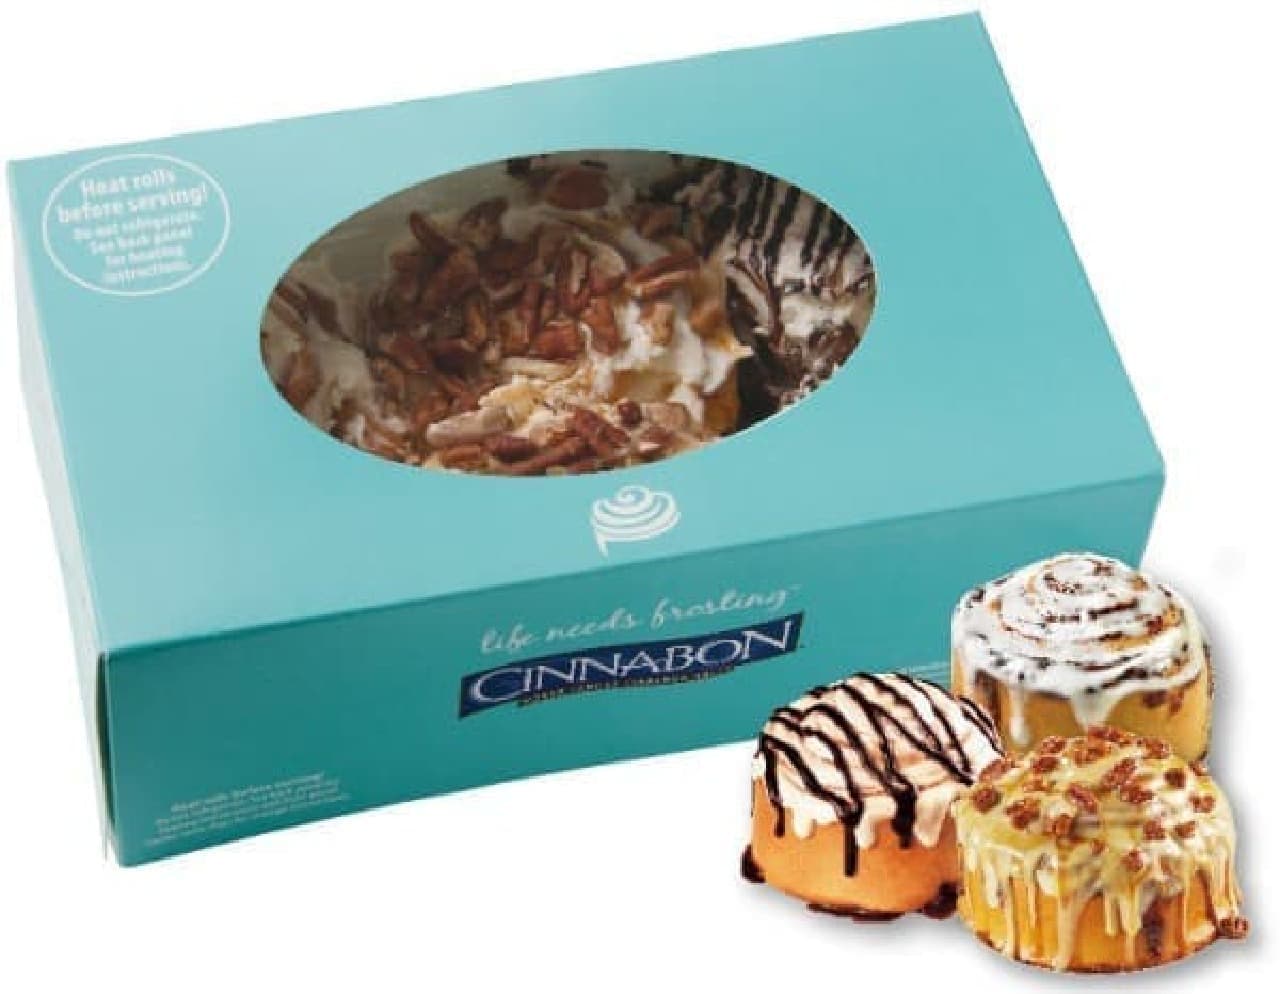 Finally, Cinnabon lands at Tokyo Station for the first time!